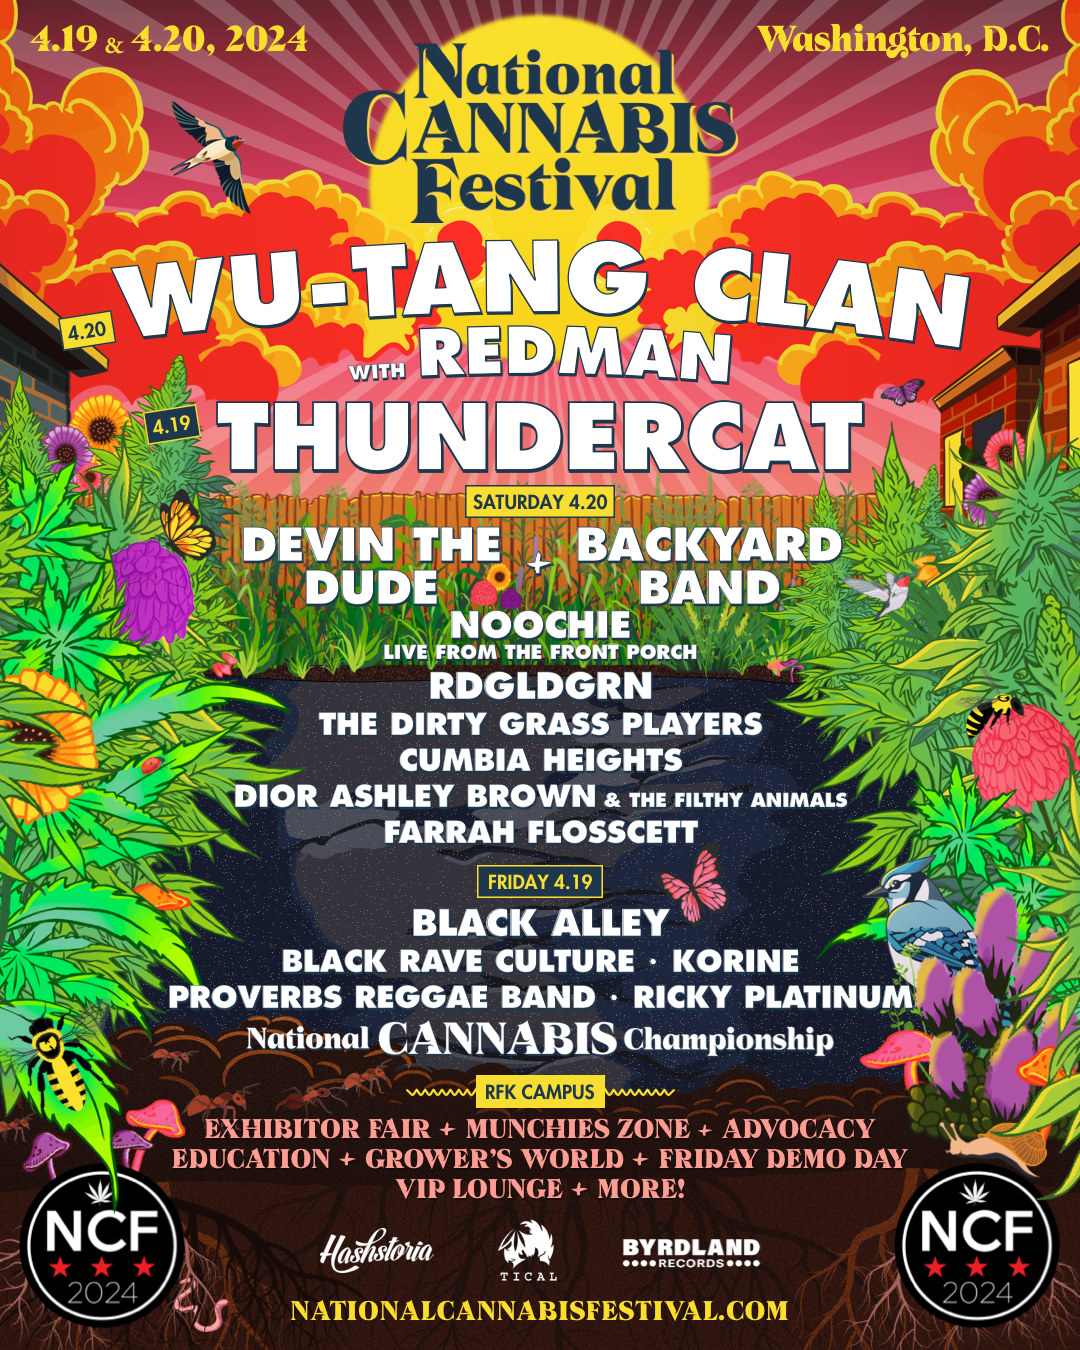   National Cannabis Festival 2024 Lineup: Wu-Tang Clan, Redman, Thundercat, Devin The Dude, Backyard Band, Noochie Live From The Front Porch, RDGLDGRN, The Dirty Grass Players, Cumbia Heights, Dior Ashley Brown & The Filthy Animals, Farrah Flosscett, Black